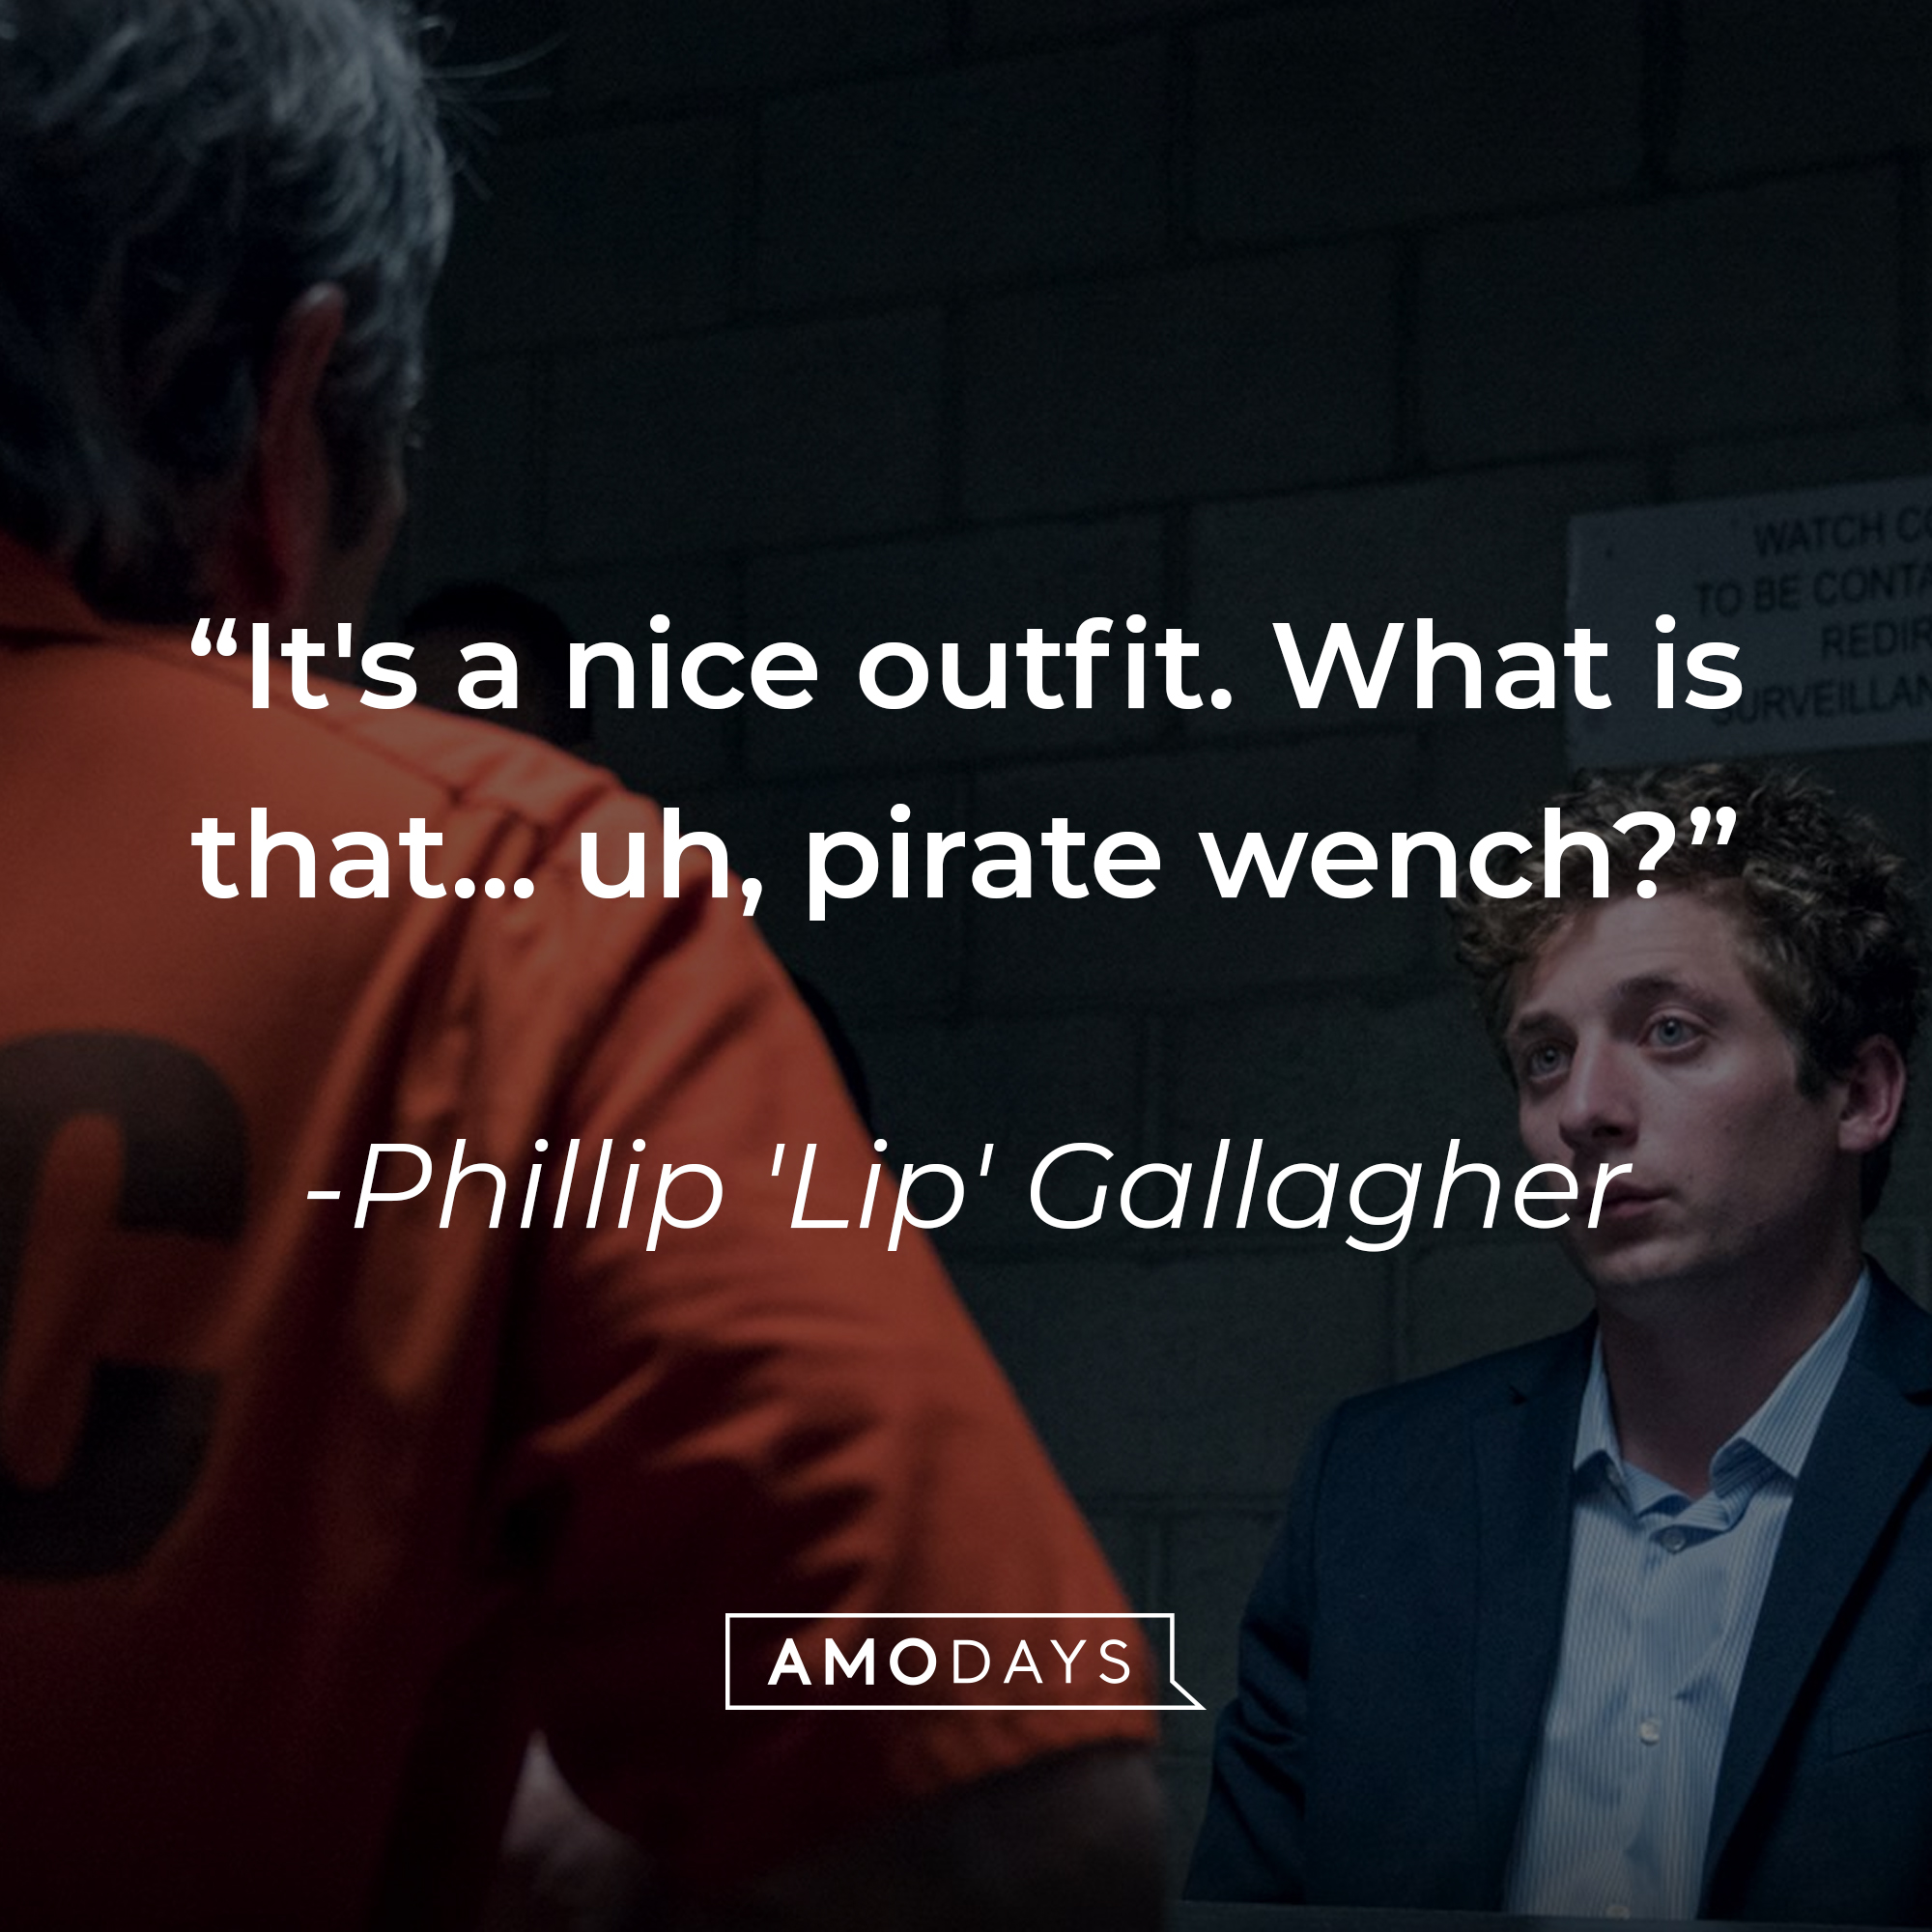 Phillip 'Lip' Gallagher with his quote: “It's a nice outfit. What is that... uh, pirate wench?” | Source: facebook.com/ShamelessOnShowtime